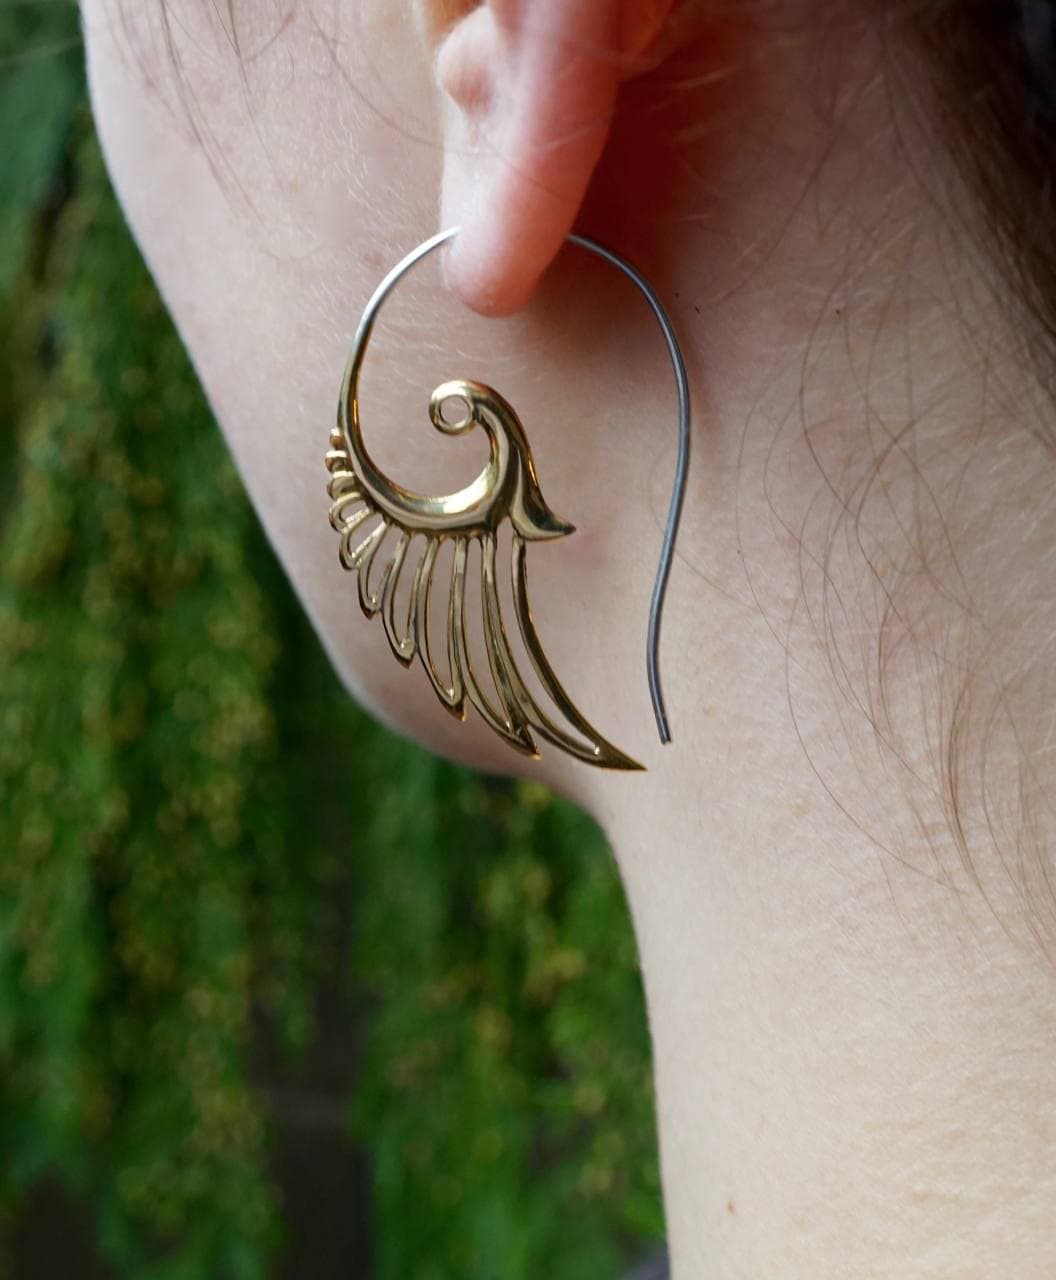 Feather Wing Earrings Brass with Silver Ear-stems